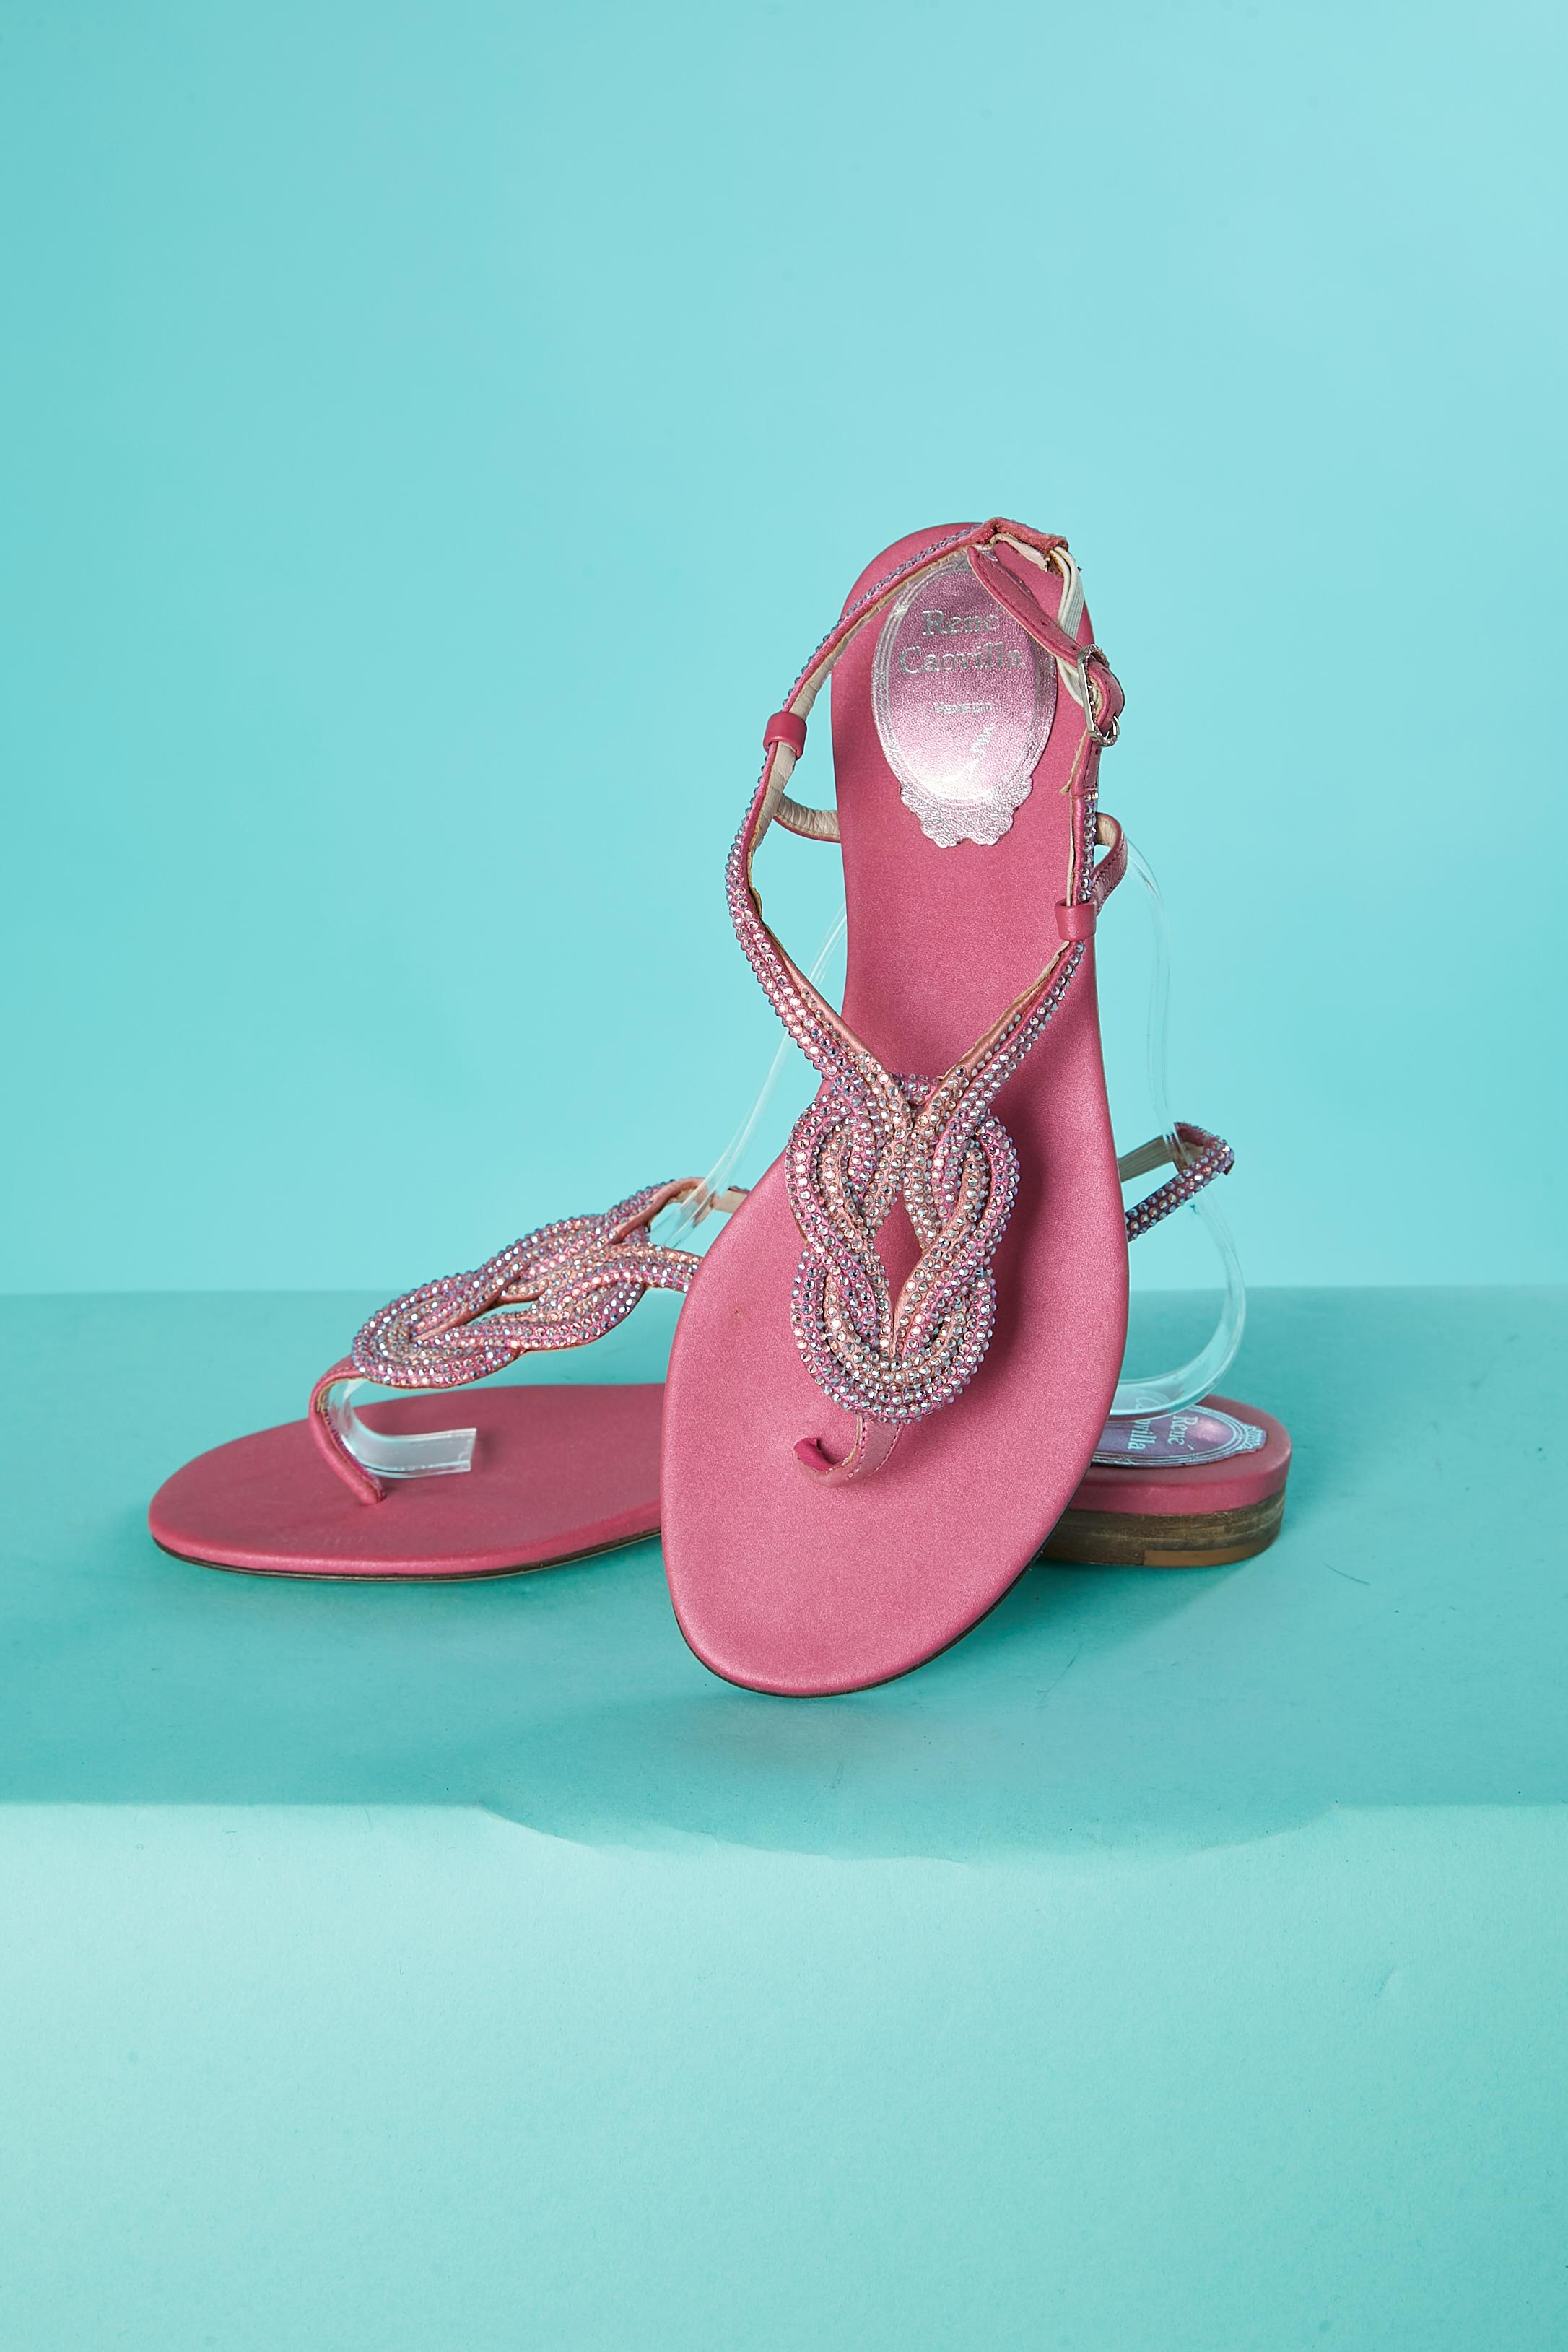 Brown Flat evening sandals in pink satin and rhinestone René Caovilla  For Sale